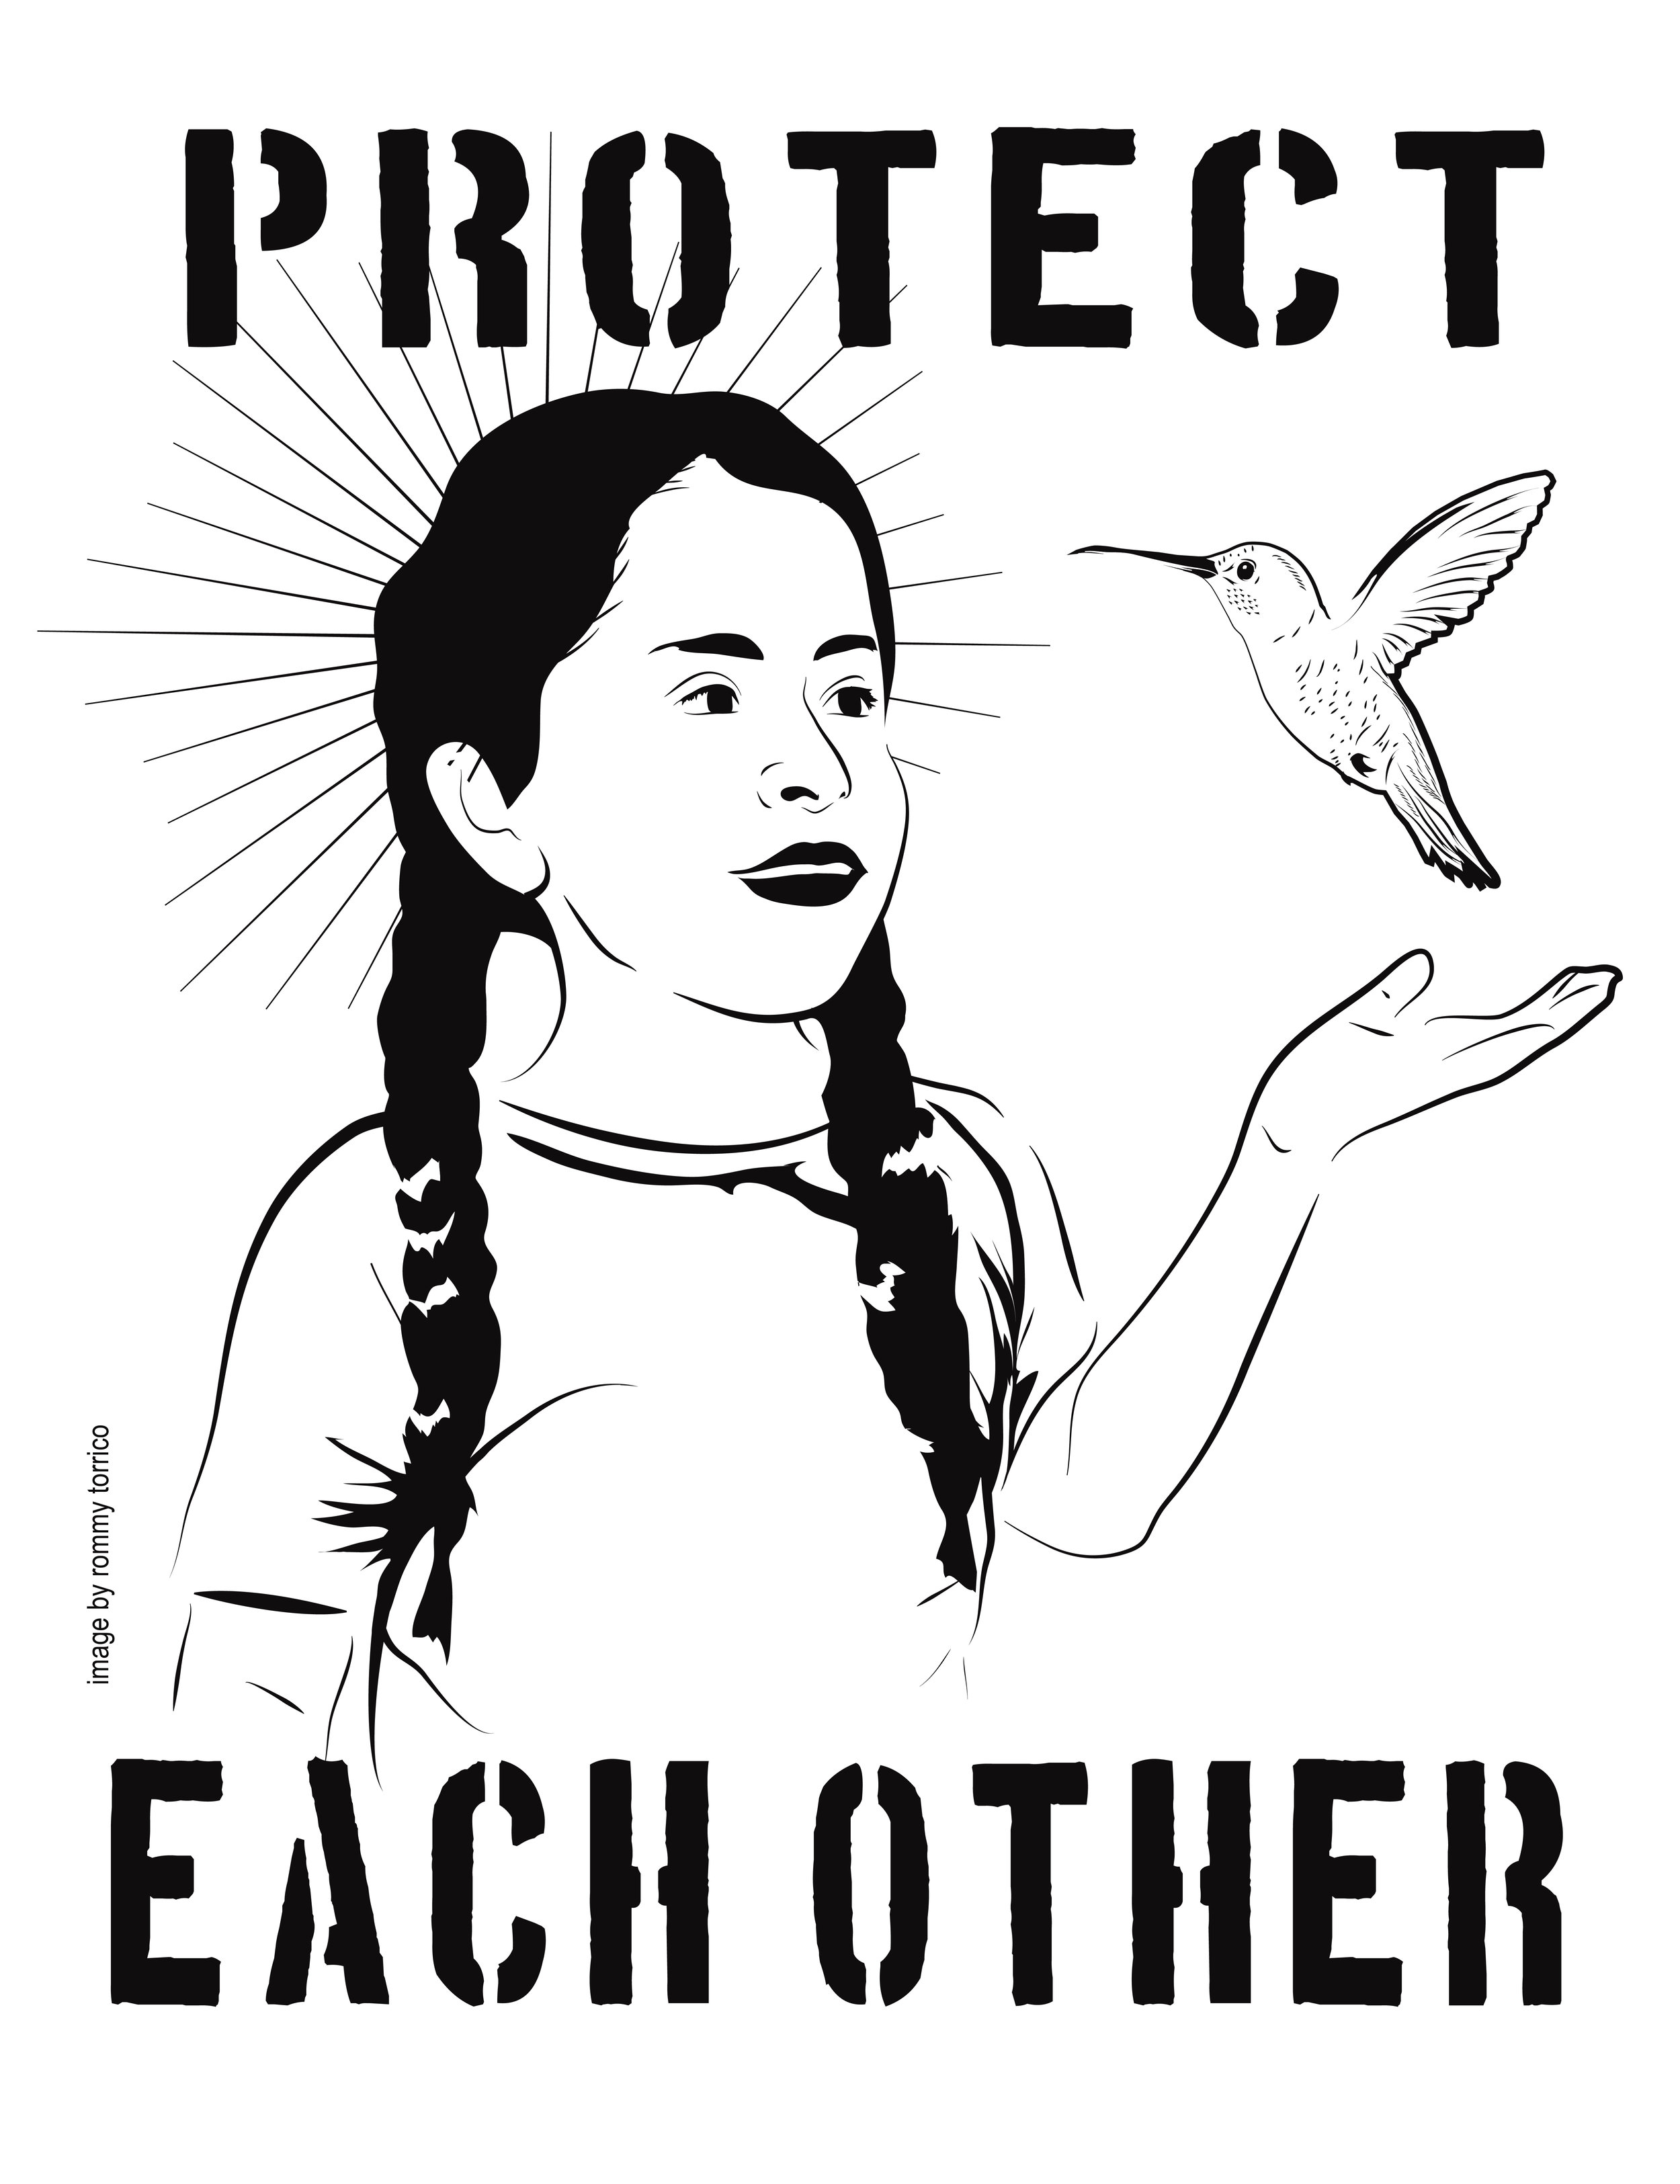 Protect Each Other